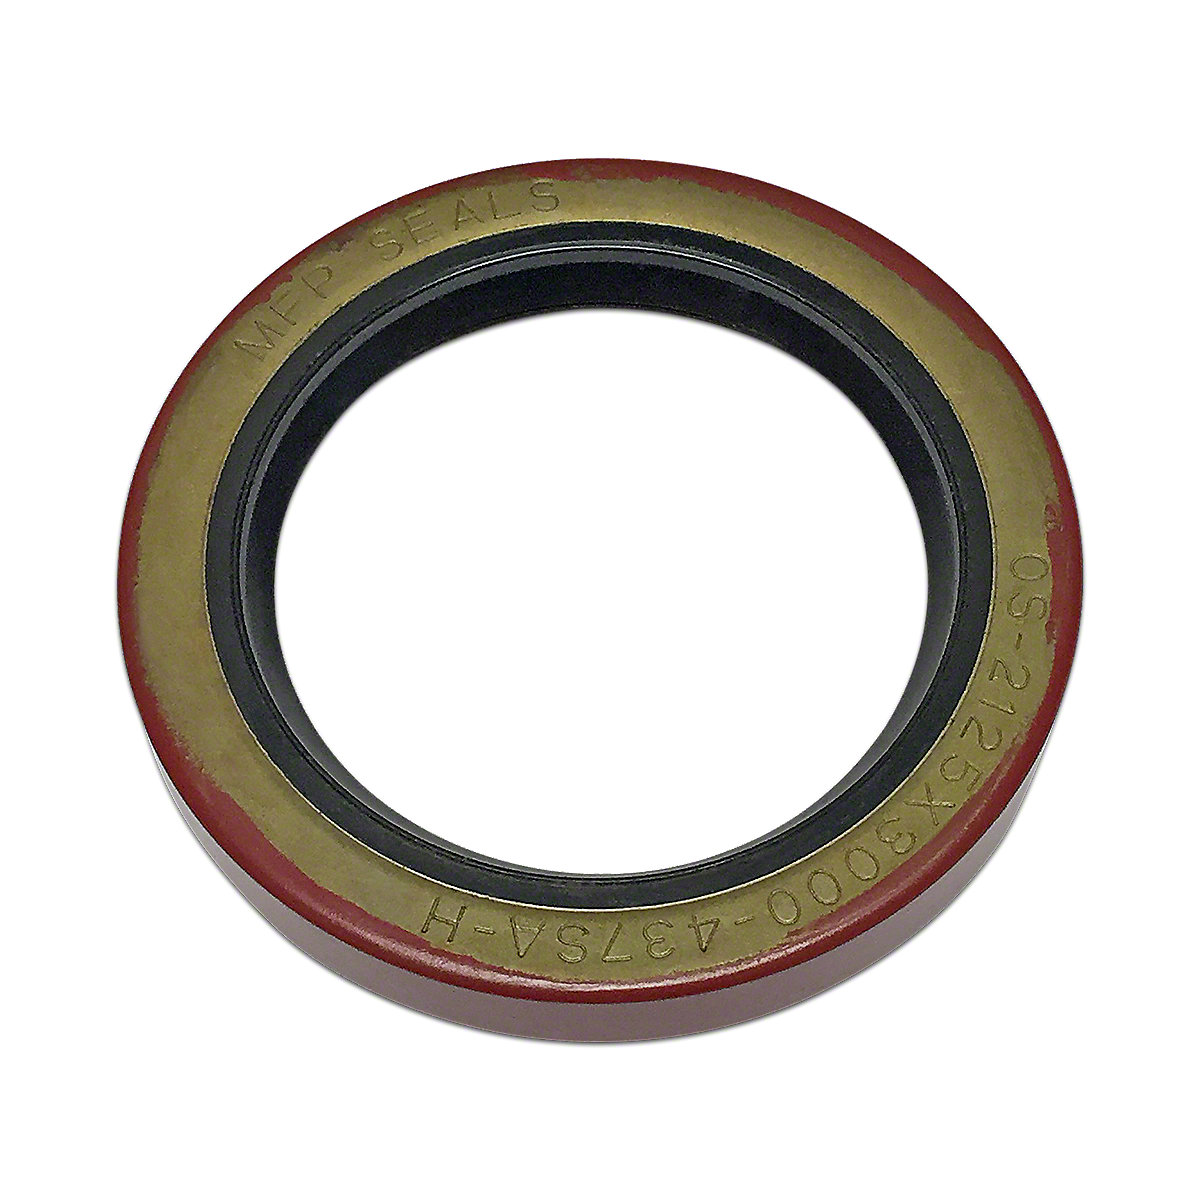 Front Crank Shaft Seal For Massey Ferguson: TE20, TO20, TO30, 40, TO35, 50, 135, 150, 230, 235, 245, 35, Massey Harris: Colt 21, Mustang 23, 101 Jr, 102 Jr, 20, 22, 30, 50, 81, 82.